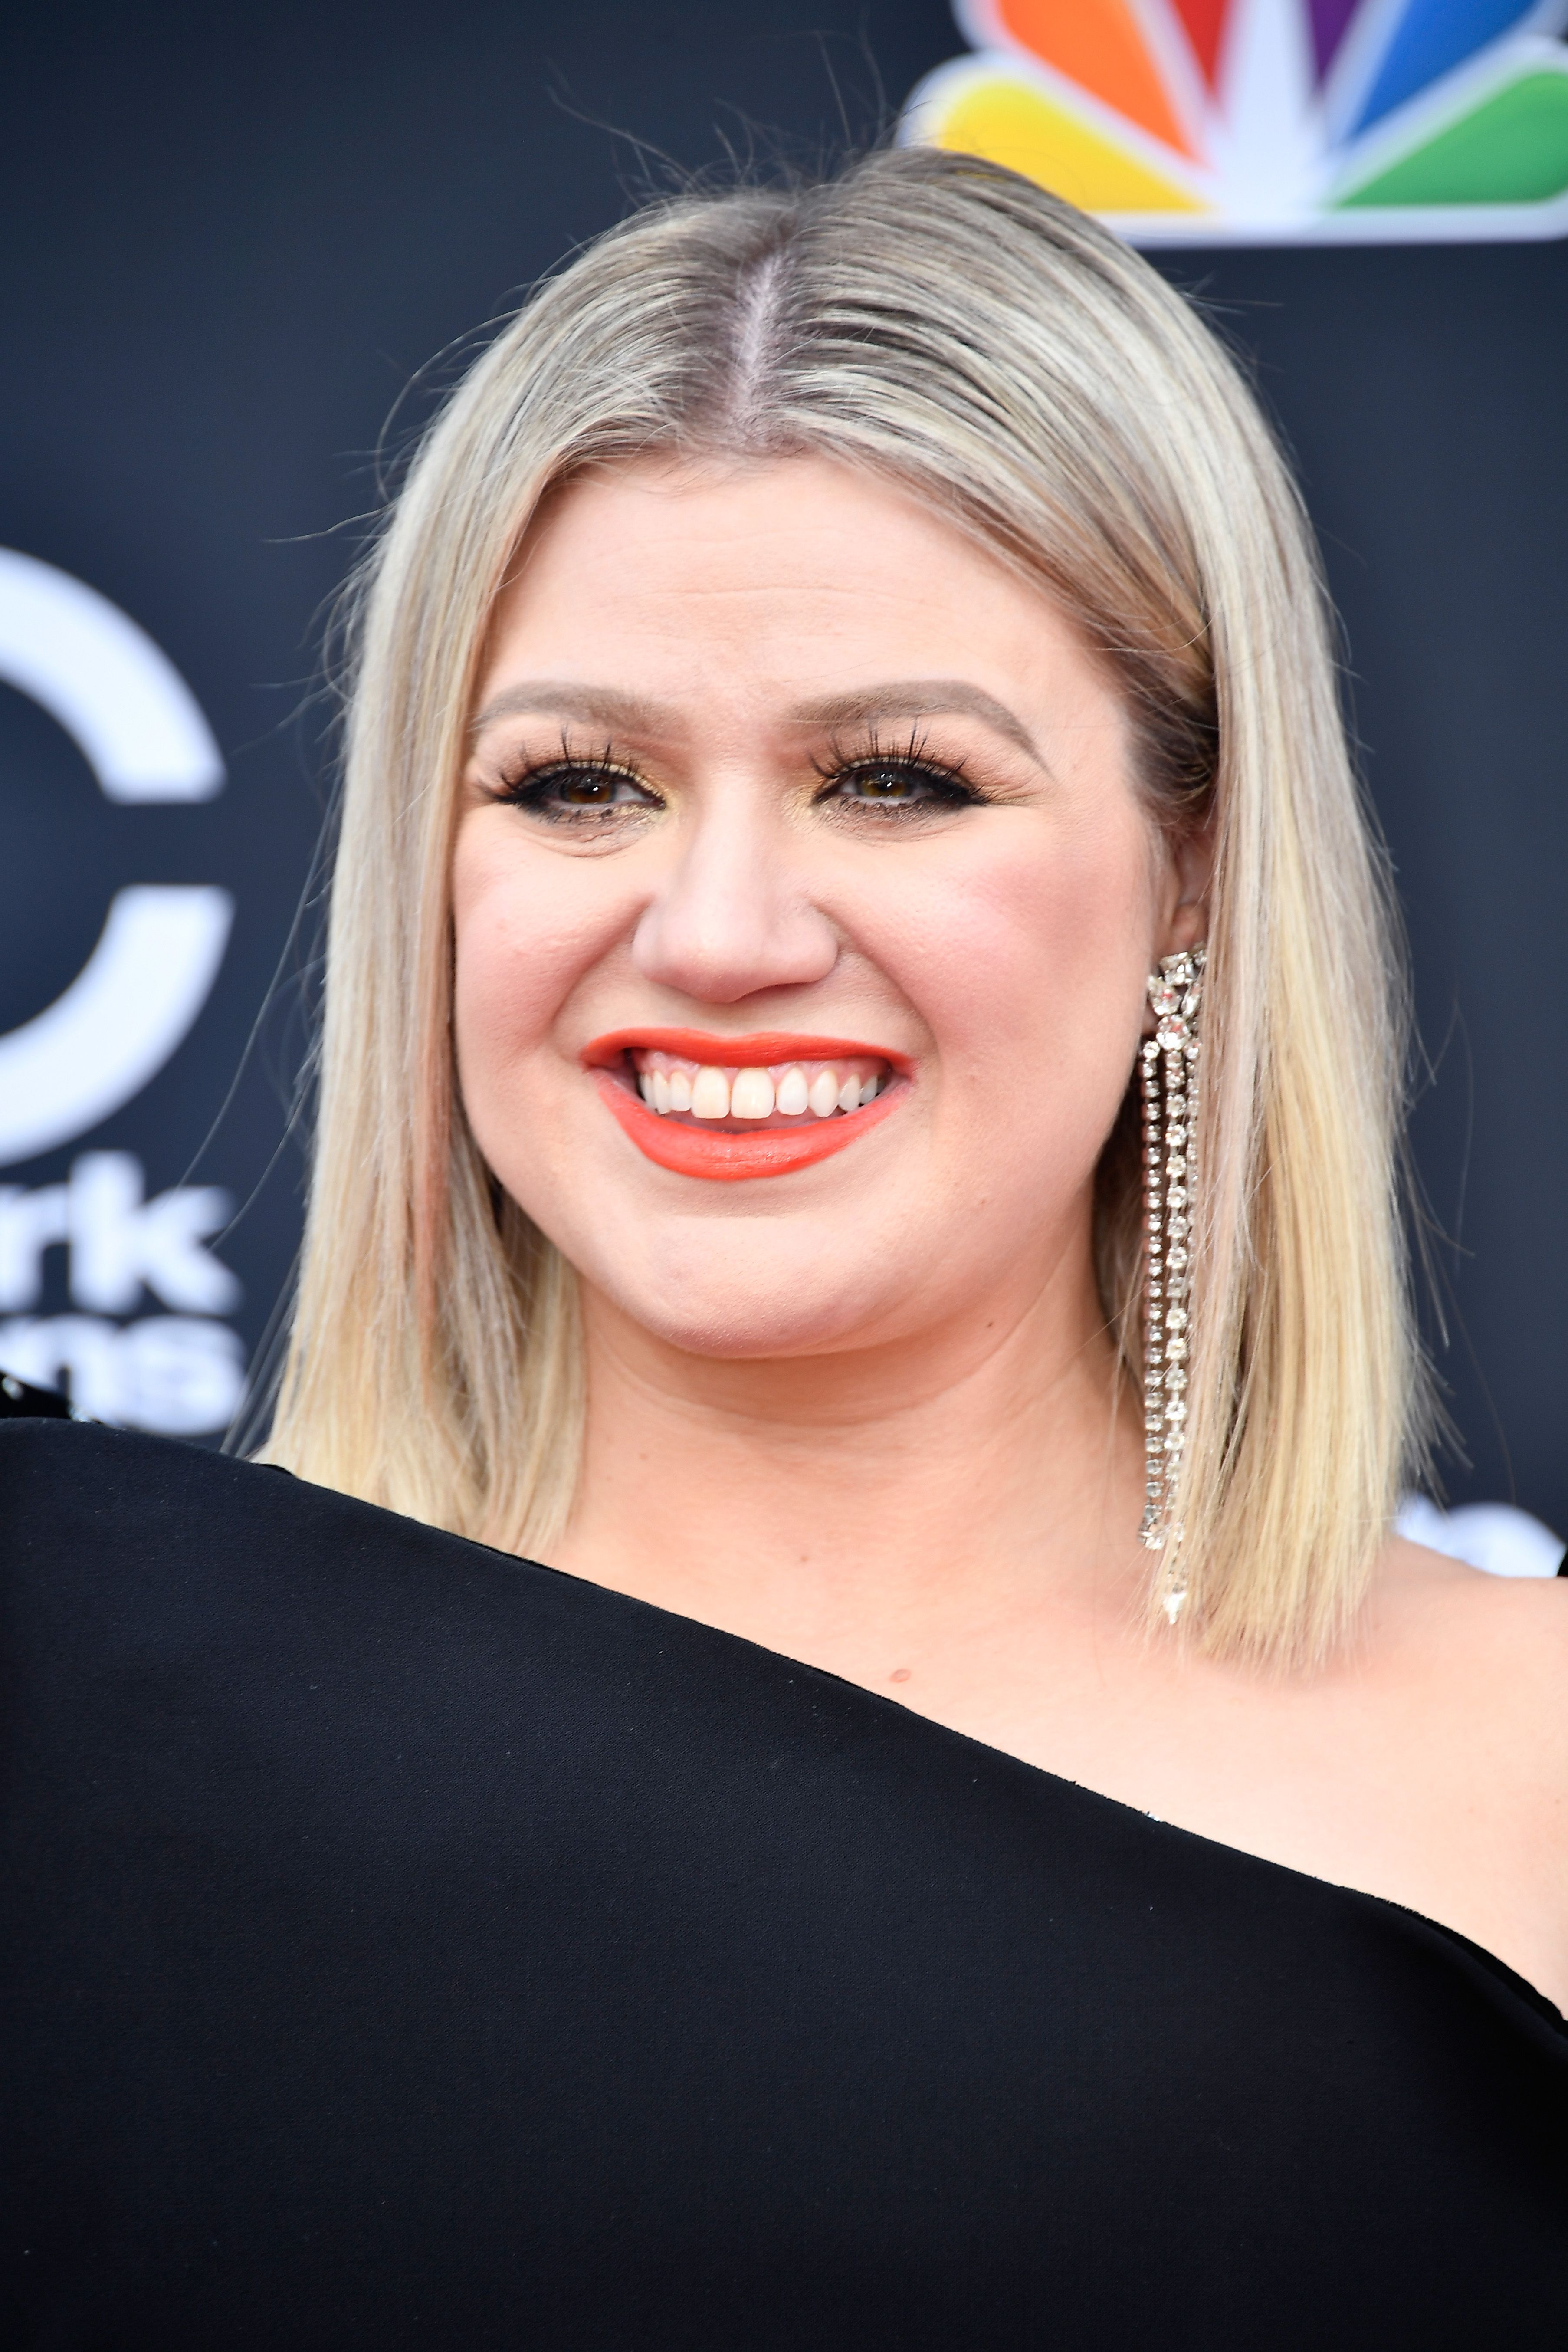 Kelly Clarkson at the 2018 Billboard Music Awards at MGM Grand Garden Arena on May 20, 2018 in Las Vegas, Nevada | Photo: GettyImages